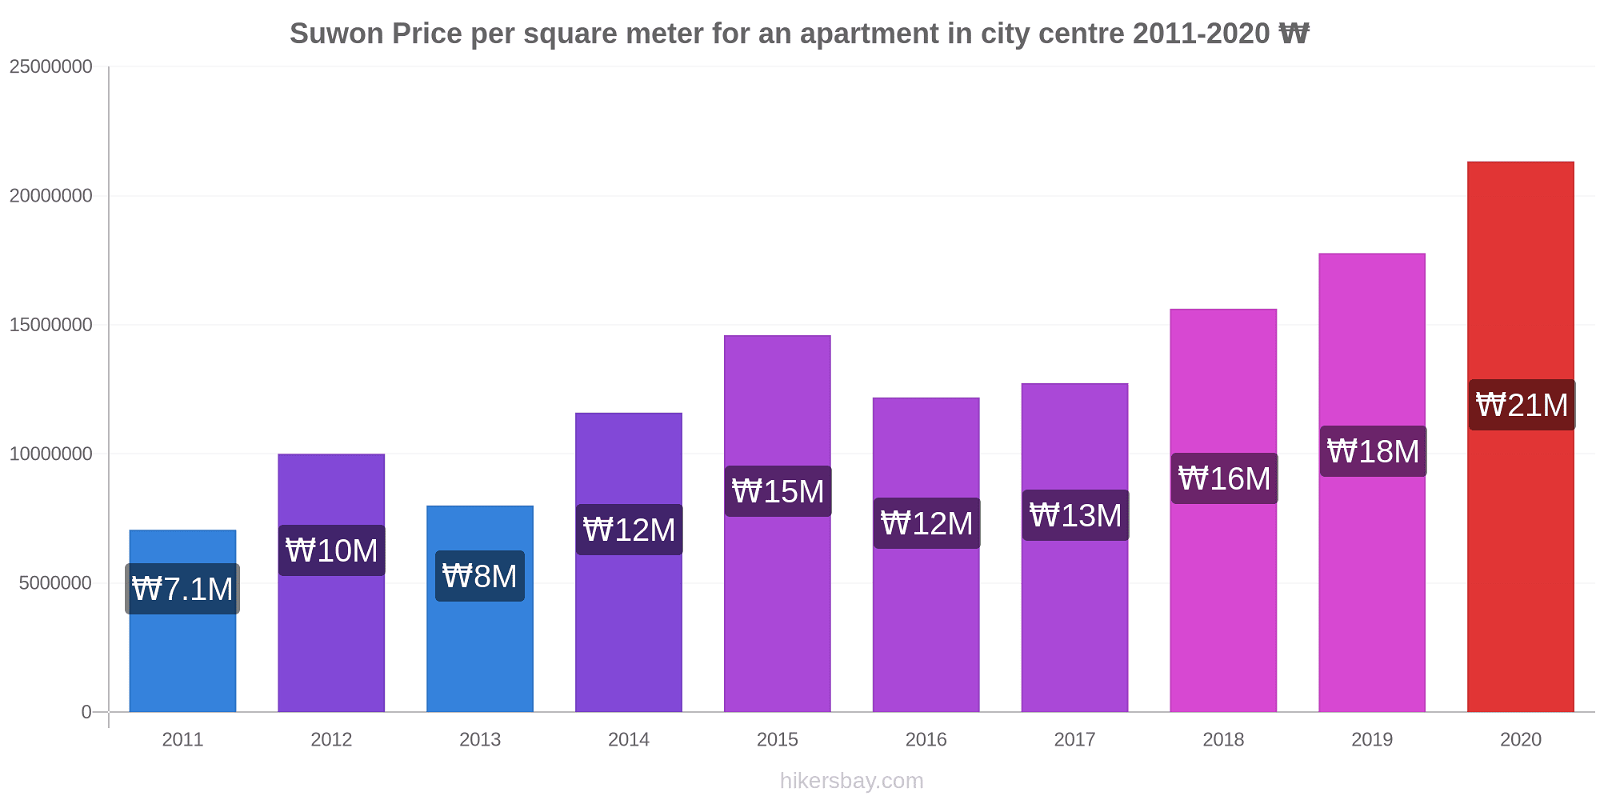 Suwon price changes Price per square meter for an apartment in city centre hikersbay.com